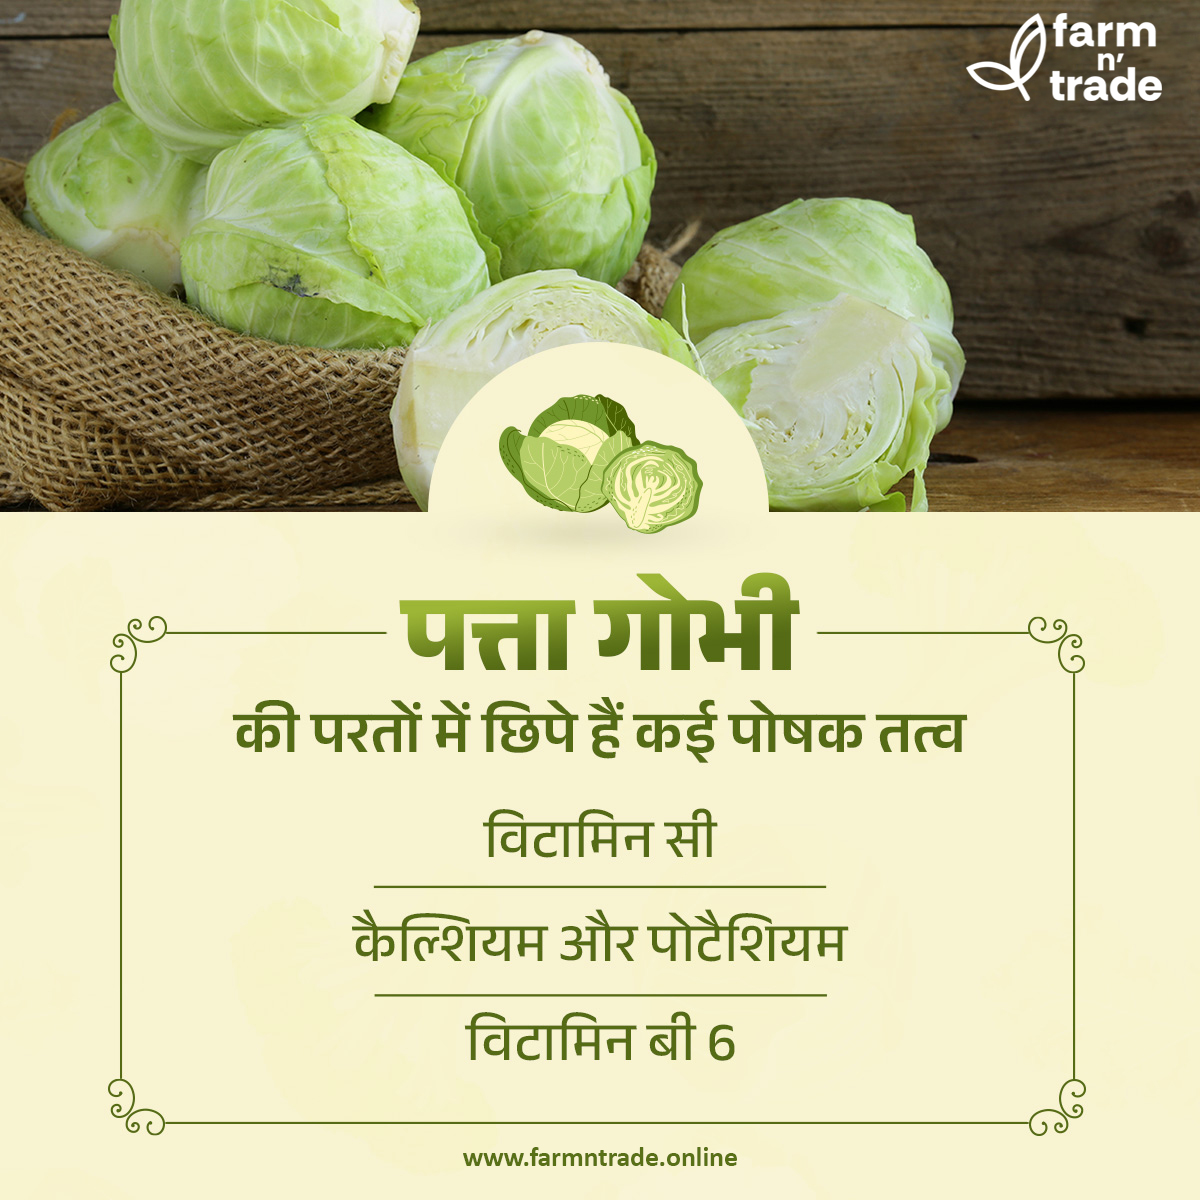 Cabbage, a nutritional powerhouse packed with fiber and low in calories, offers substantial health advantages.
#FarmNTrade #HigherStandards #CabbageBenefits #NutritionalPowerhouse #HealthyEating #FiberRich #LowCalorie #WellnessJourney #WholesomeFood #DeliciousAndHealthy